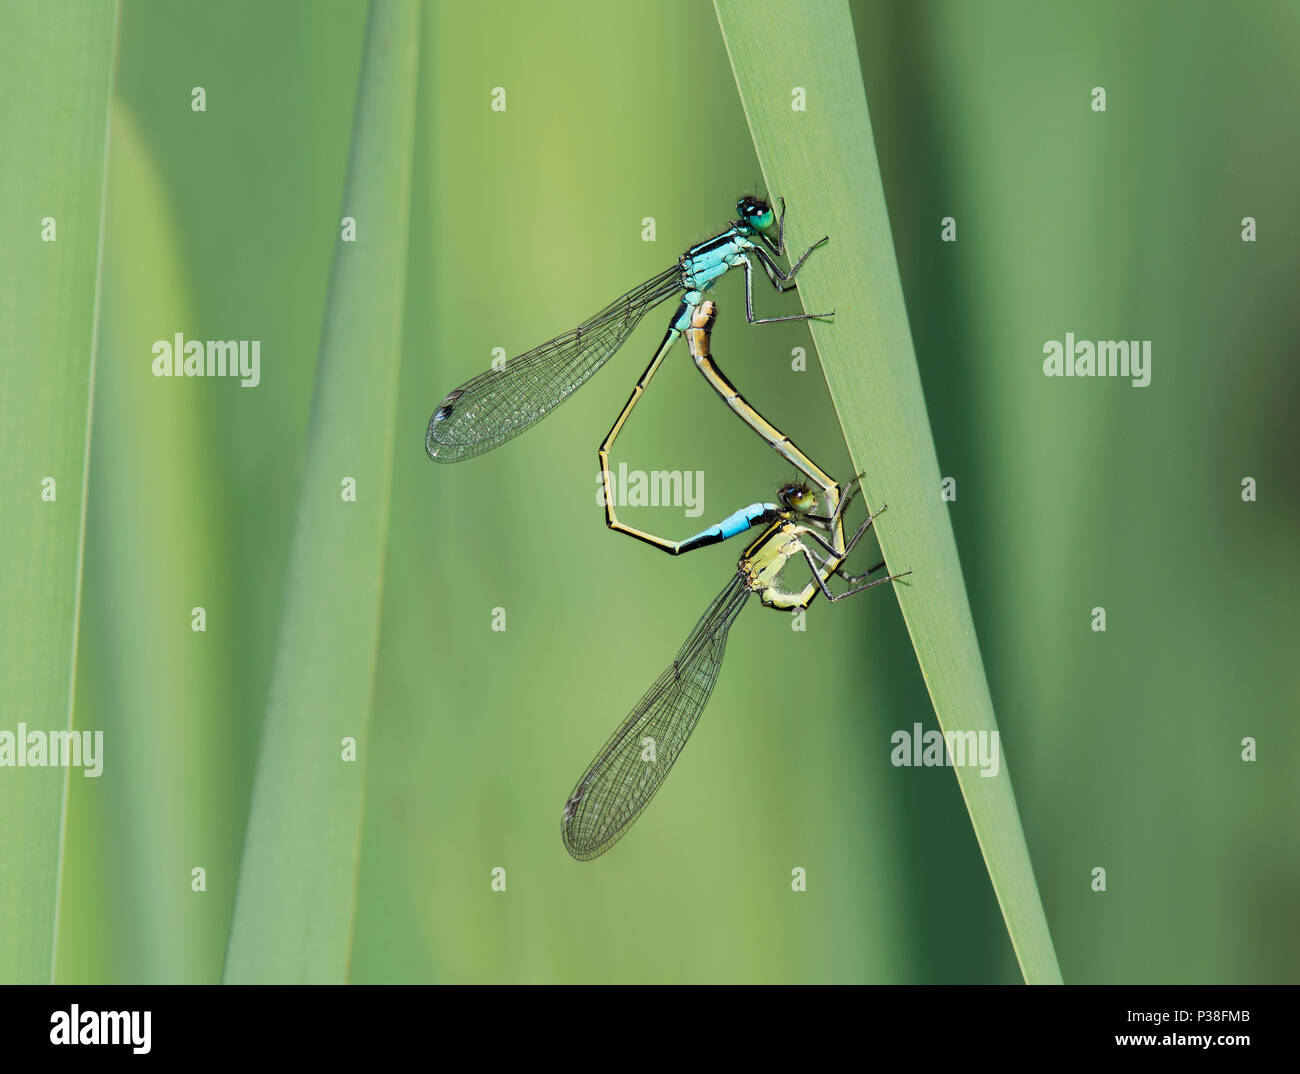 Mating pair of Blue-tailed Damselfly, Ischnura elegans, perched on reed stem in Lancashire, UK Stock Photo